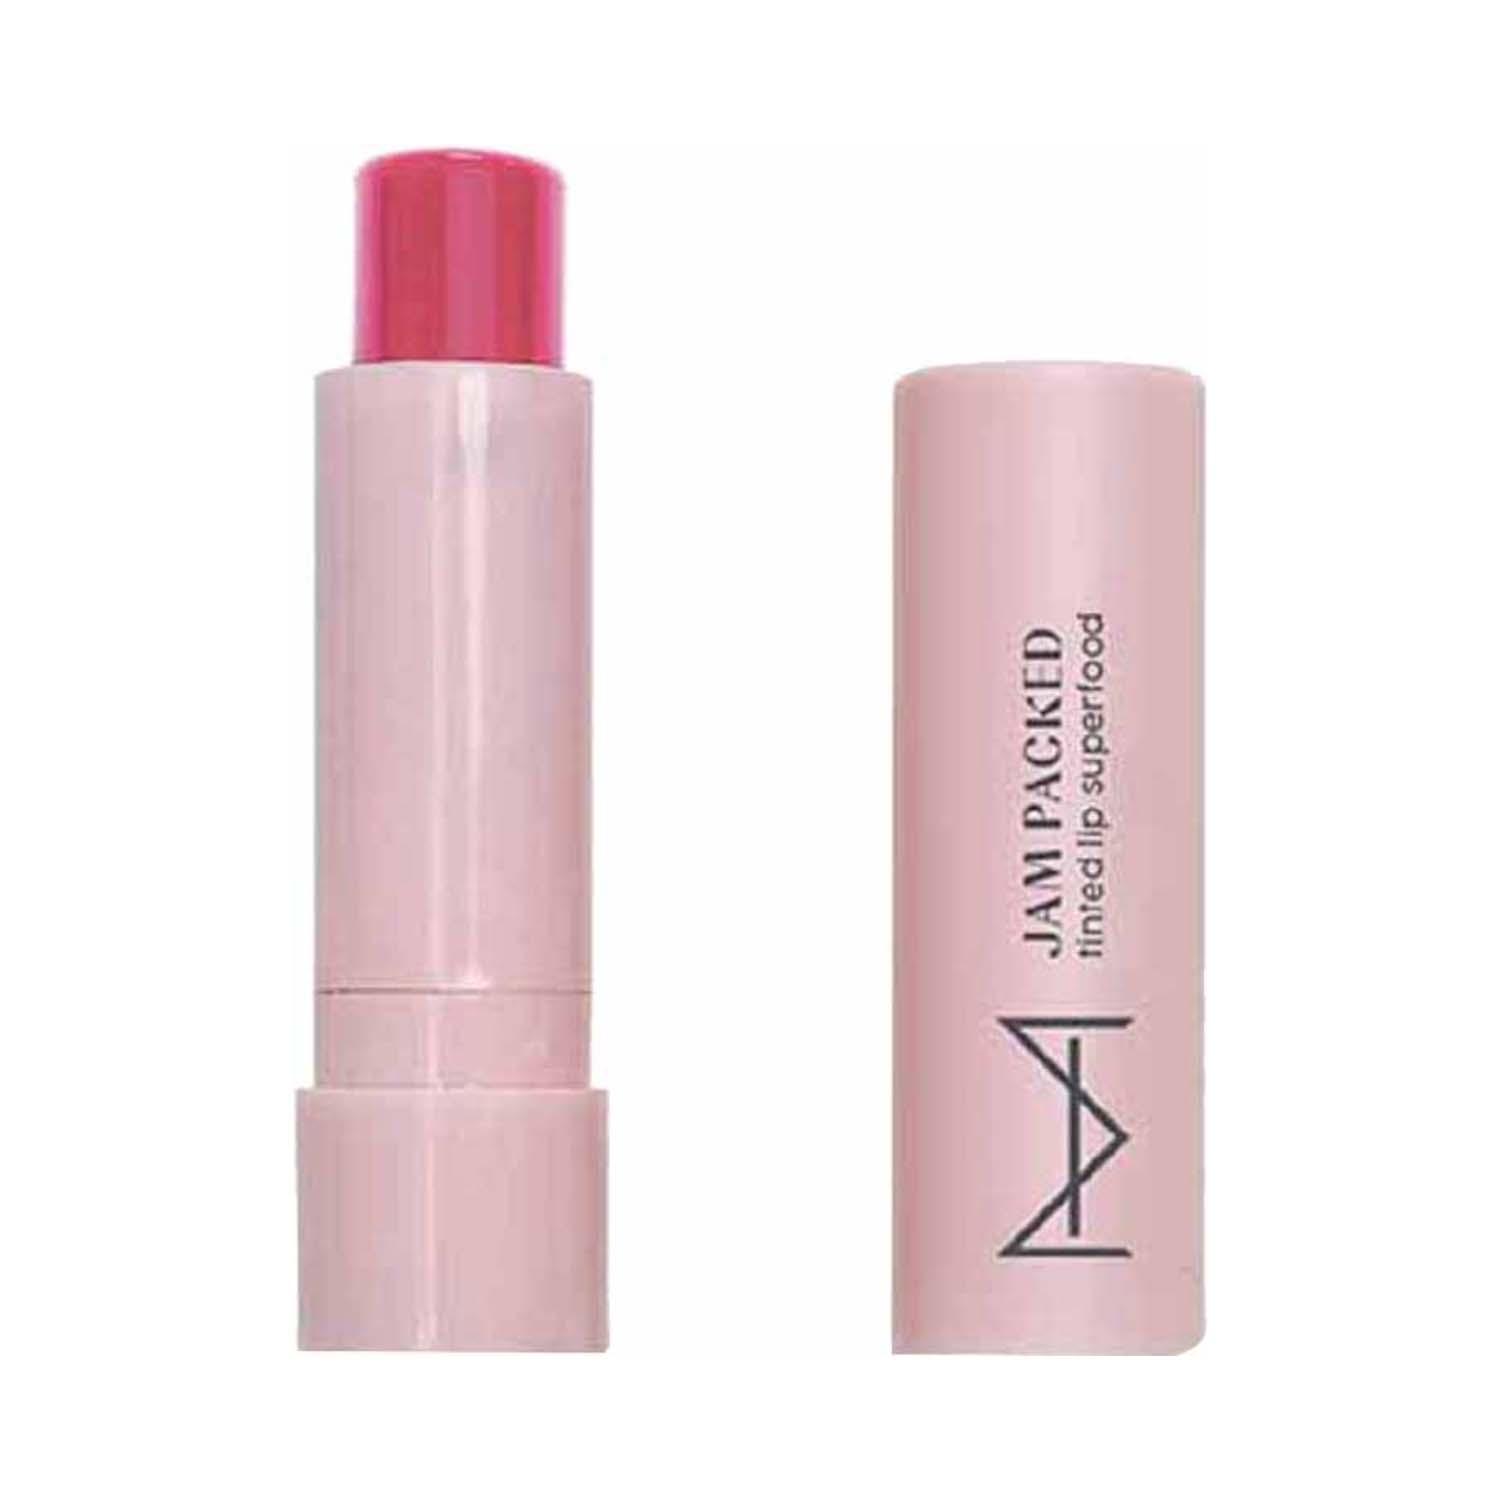 HOUSE OF MAKEUP | HOUSE OF MAKEUP Jam Packed Tinted Lip Superfood - Pink Lemonade (3.8 g)